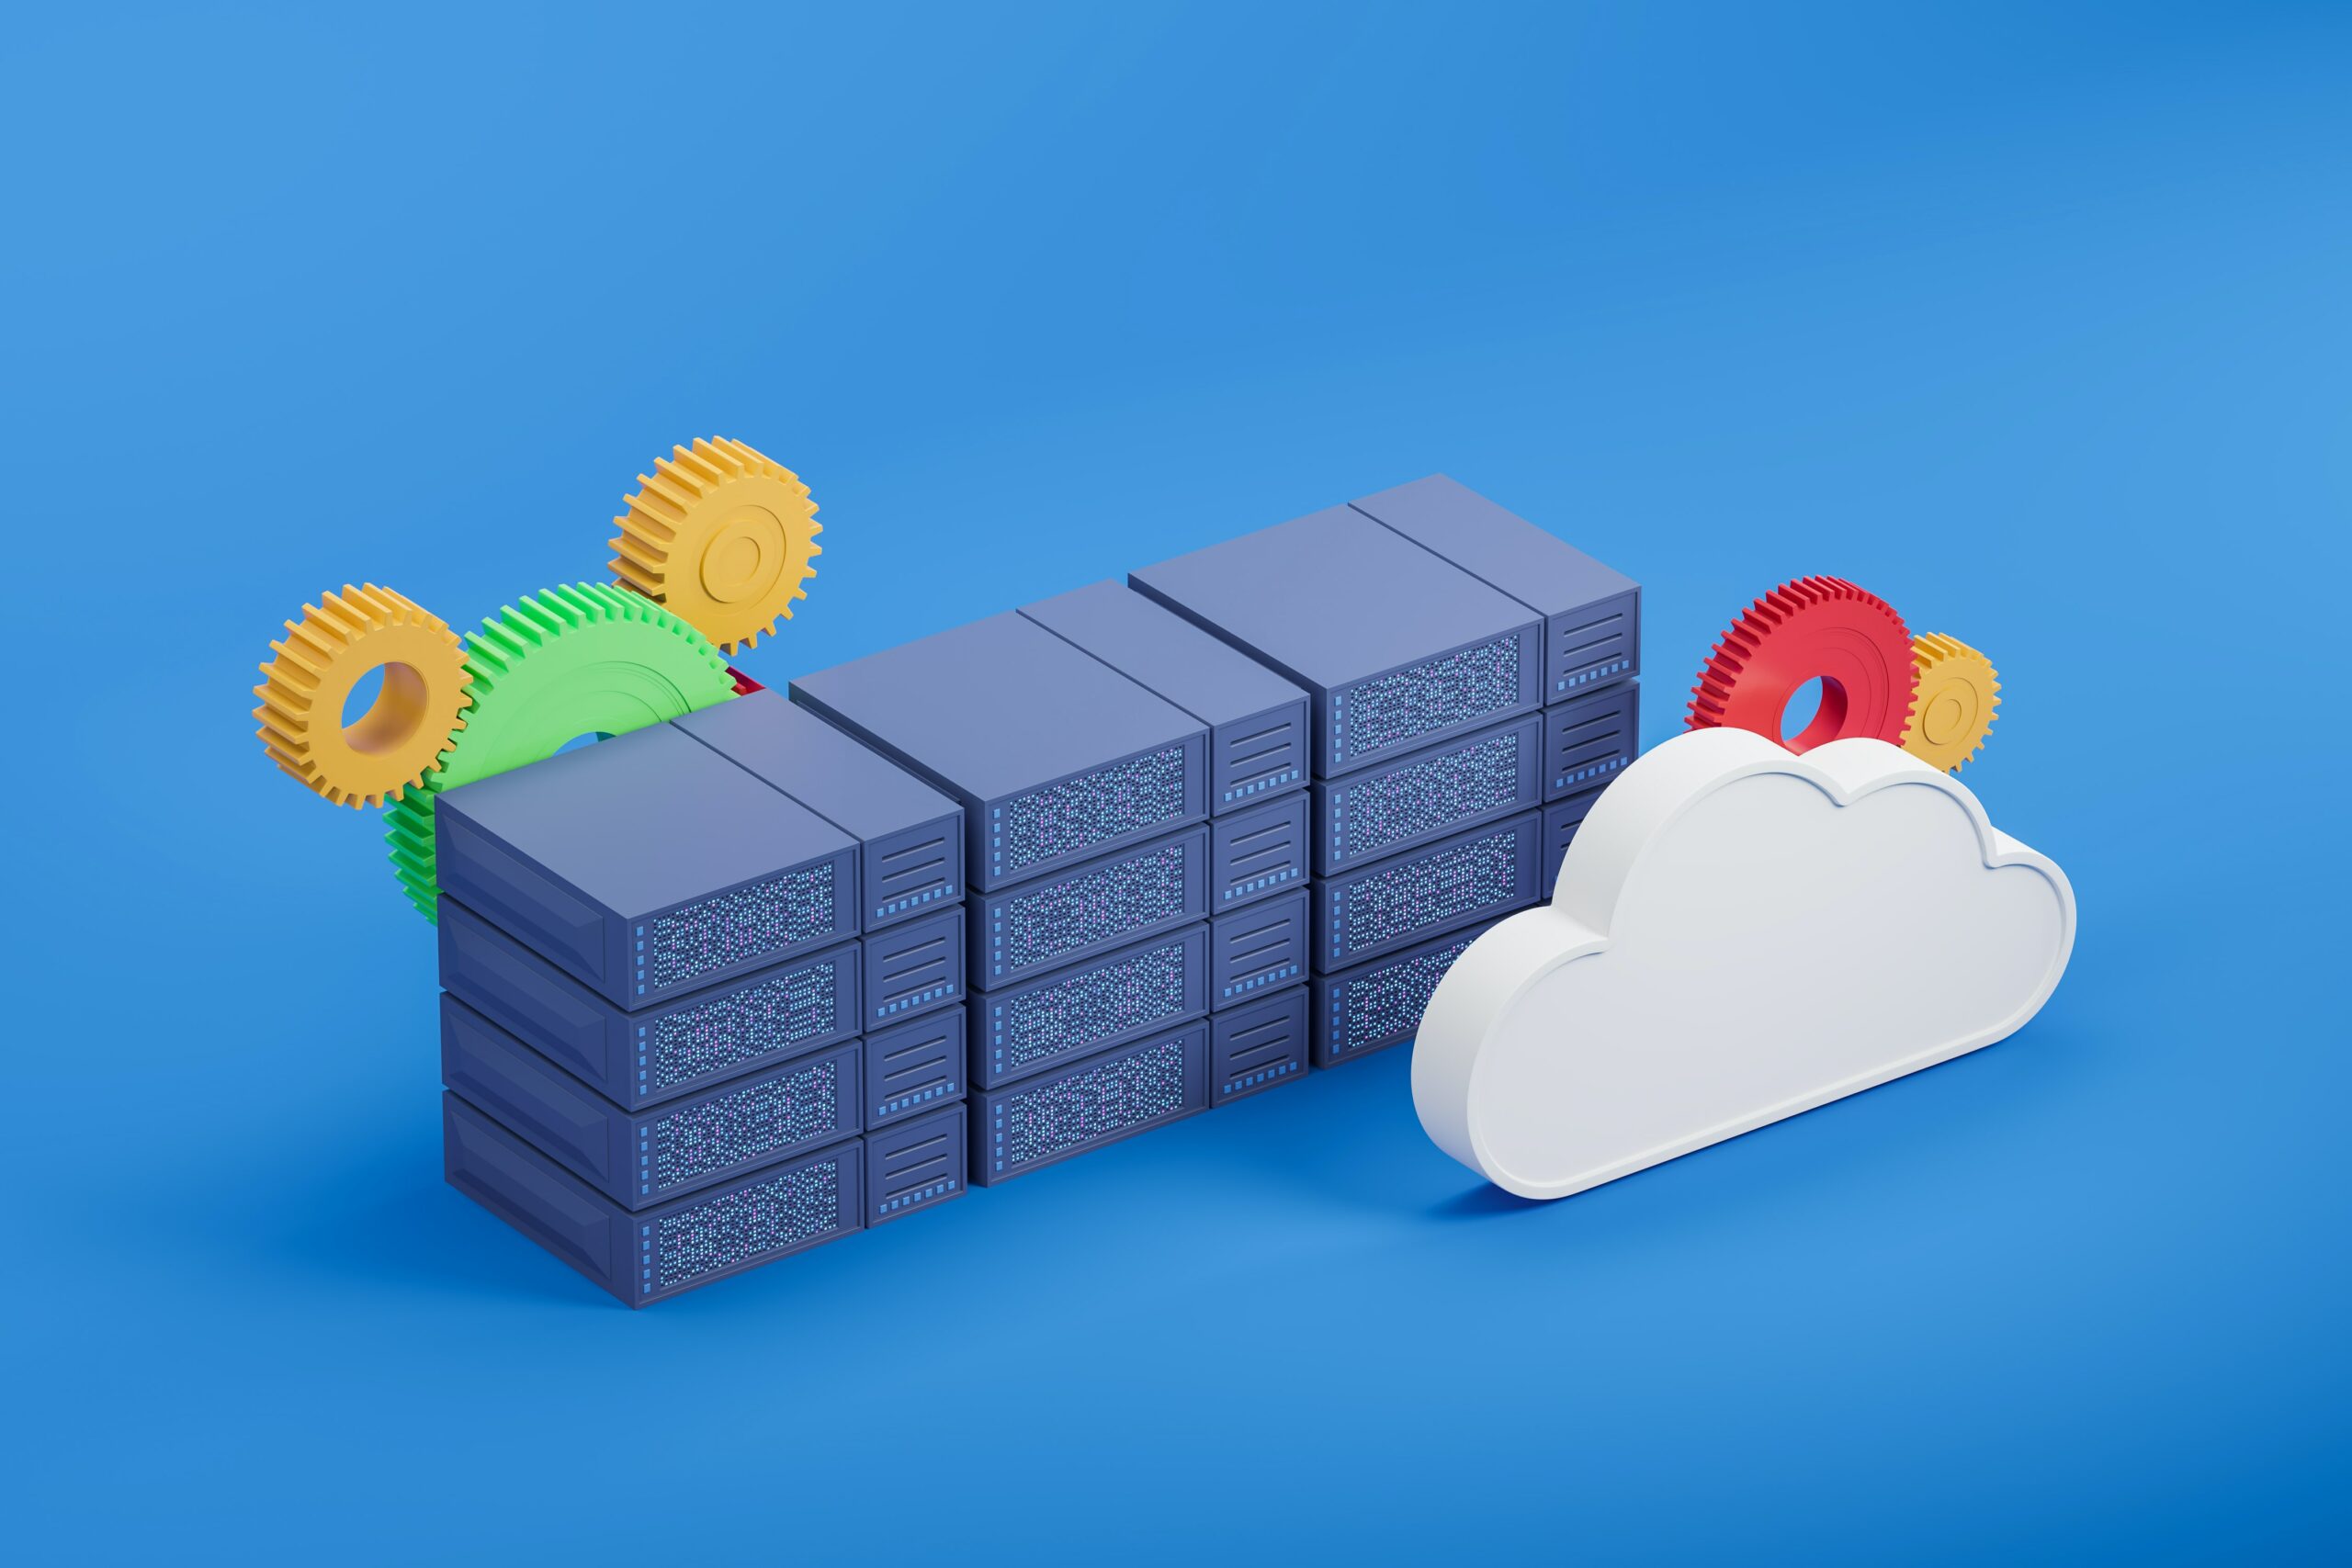 A cloud with gears on a blue background, illustrating the process of syncing files with Dropbox.